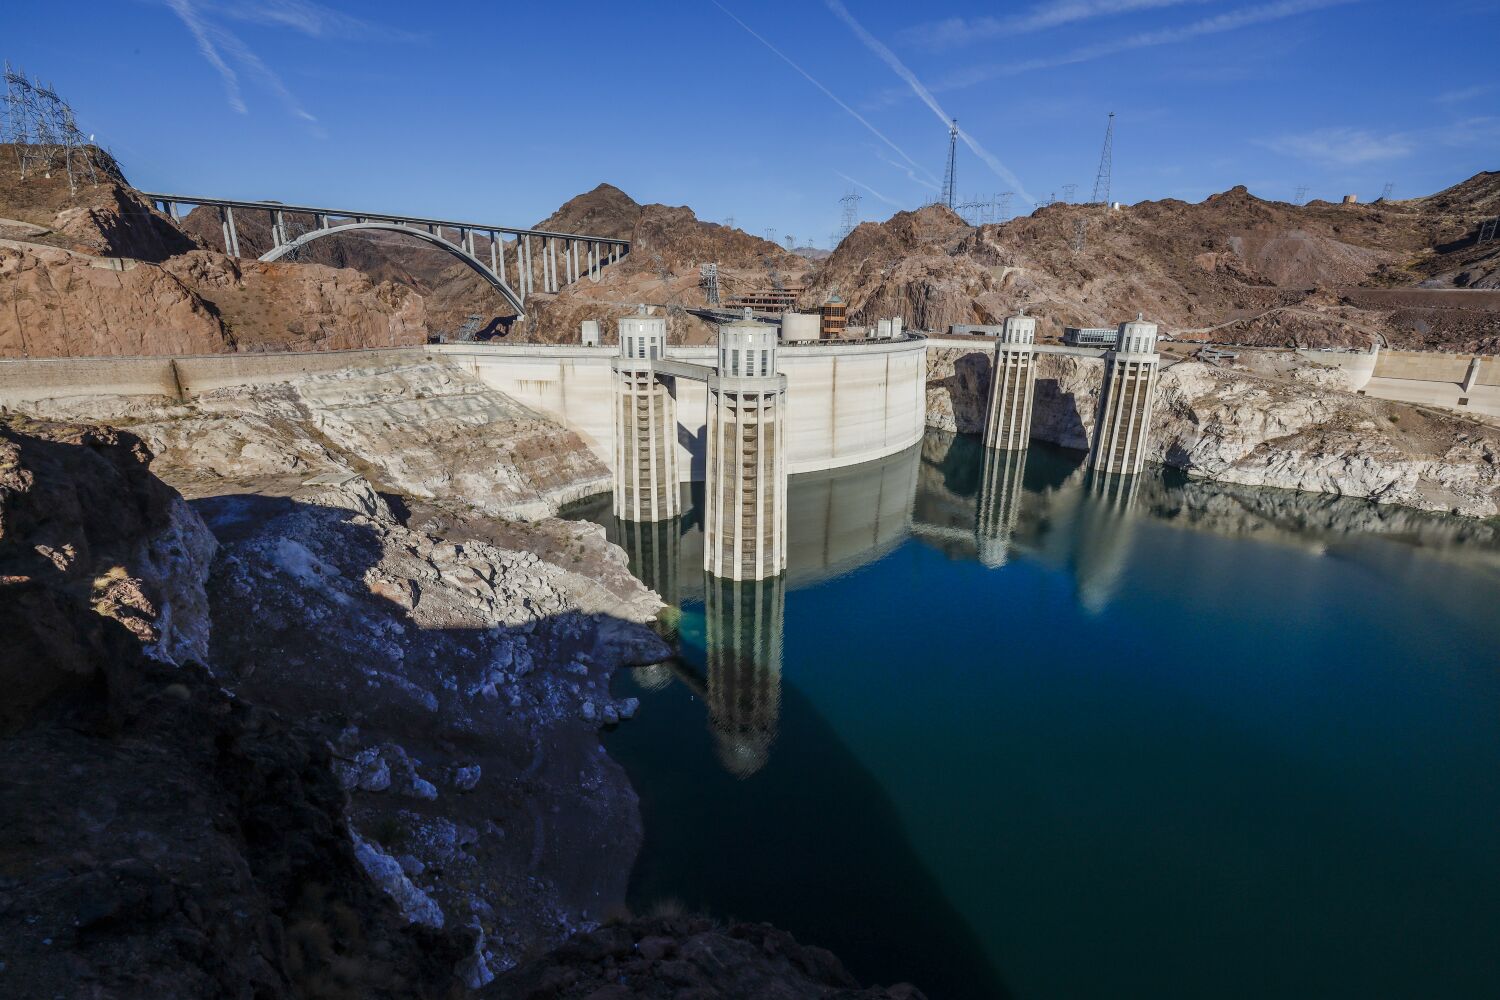 Hiltzik: The ancient enmities over the Colorado River's water